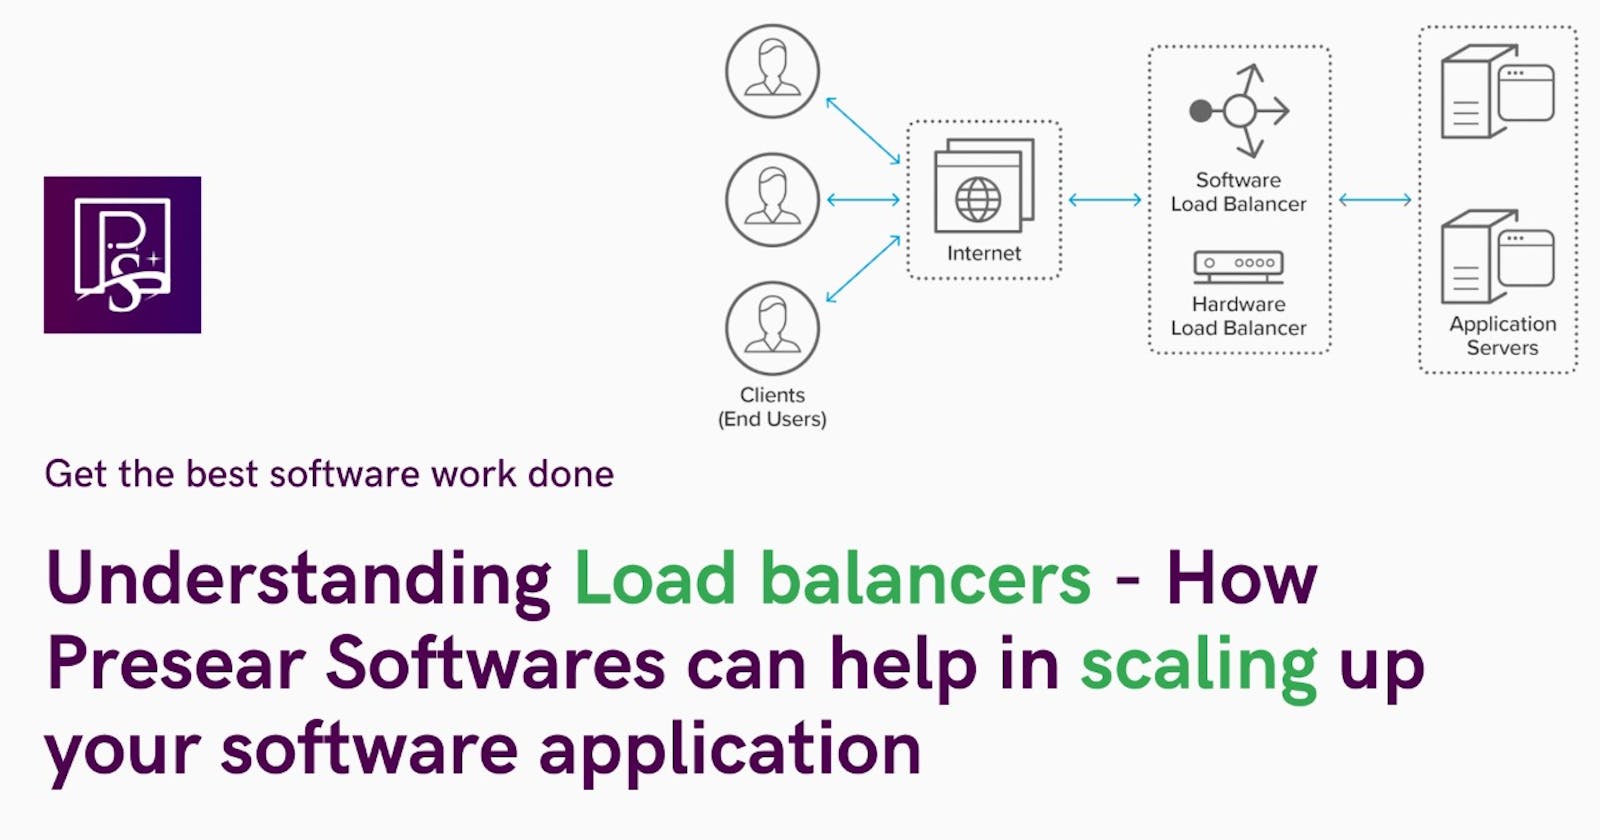 Understanding Load balancers - How Presear Softwares can help in scaling up your software application